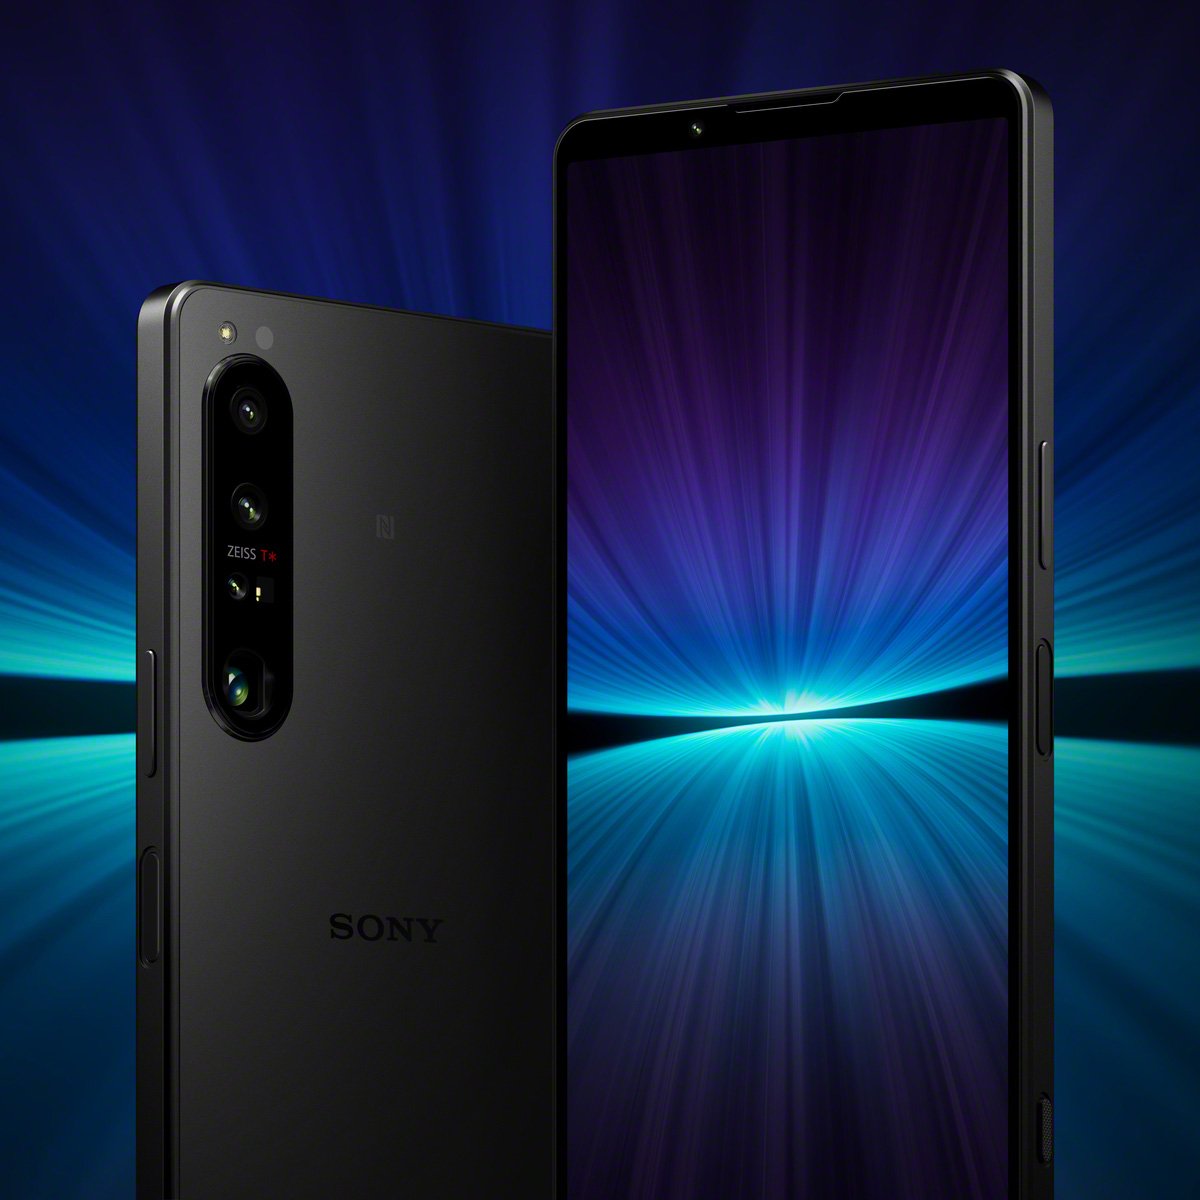 Sony's Xperia 1 IV is the World's First Smartphone with True Optical Zoom PetaPixel